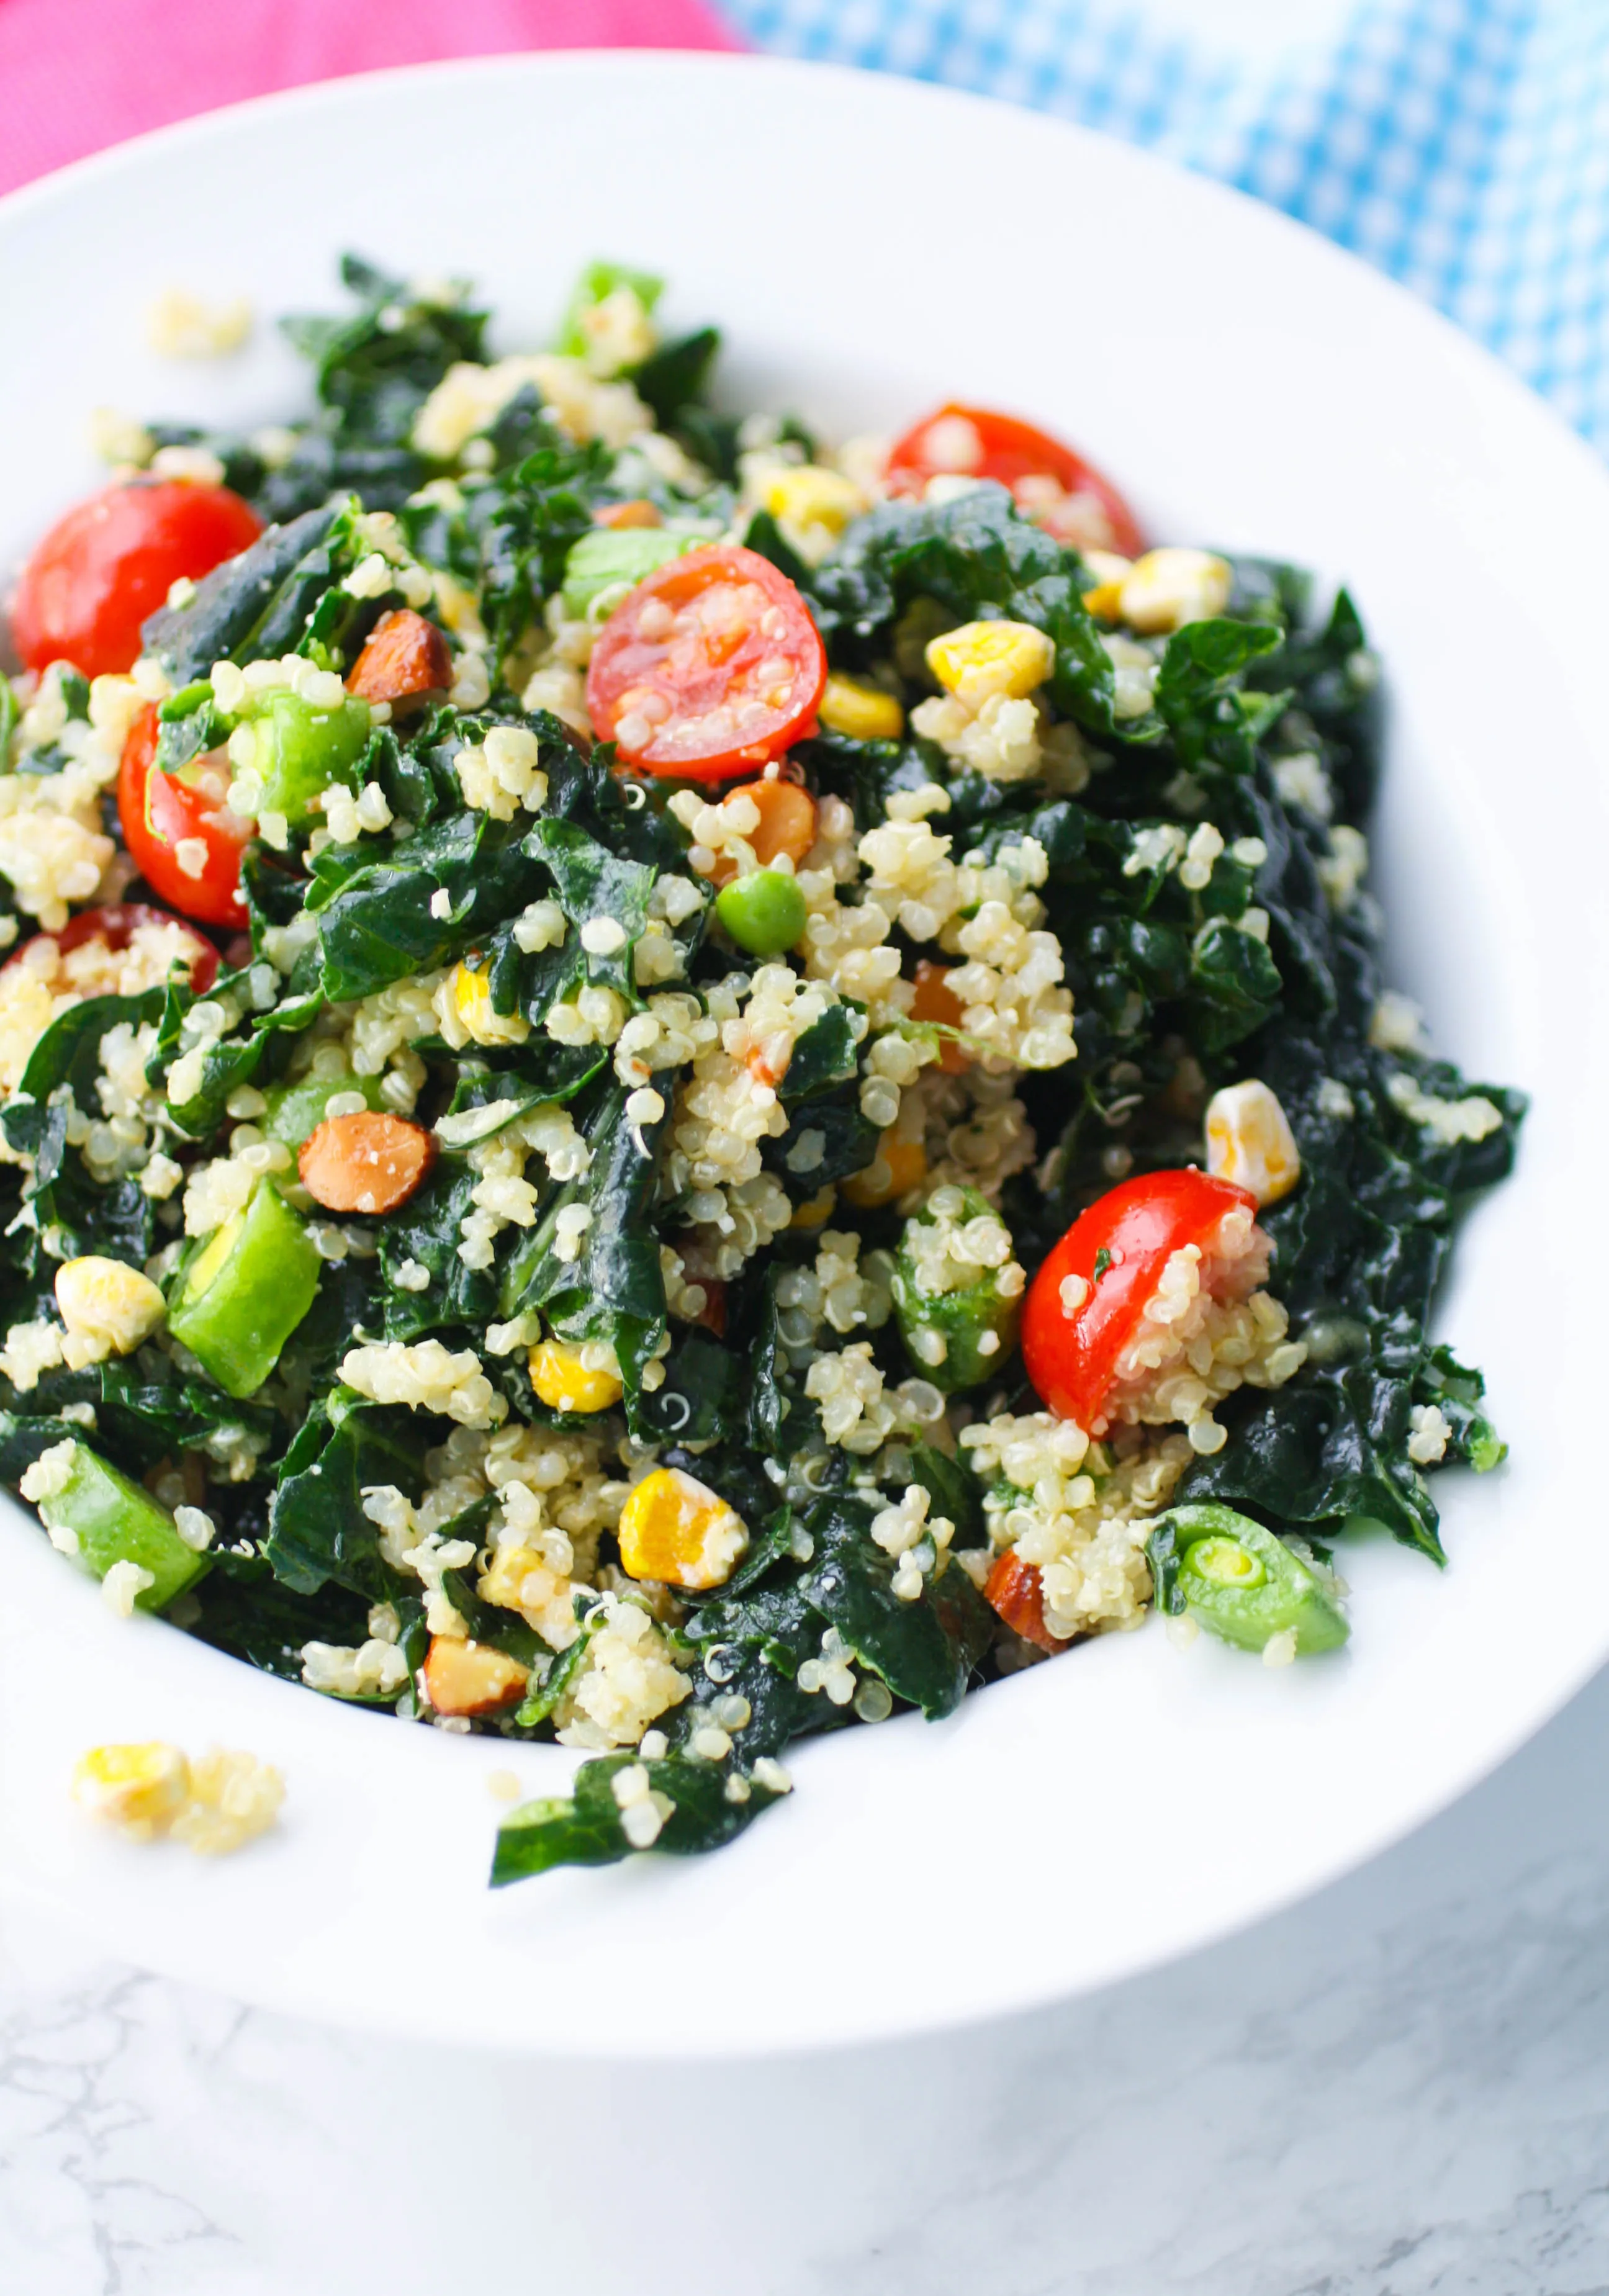 Kale and Quinoa Salad with Honey-Dijon Dressing is a healthy salad that will satisfy your hunger. You'll love this Kale and Quinoa Salad with Honey-Dijon Dressing.